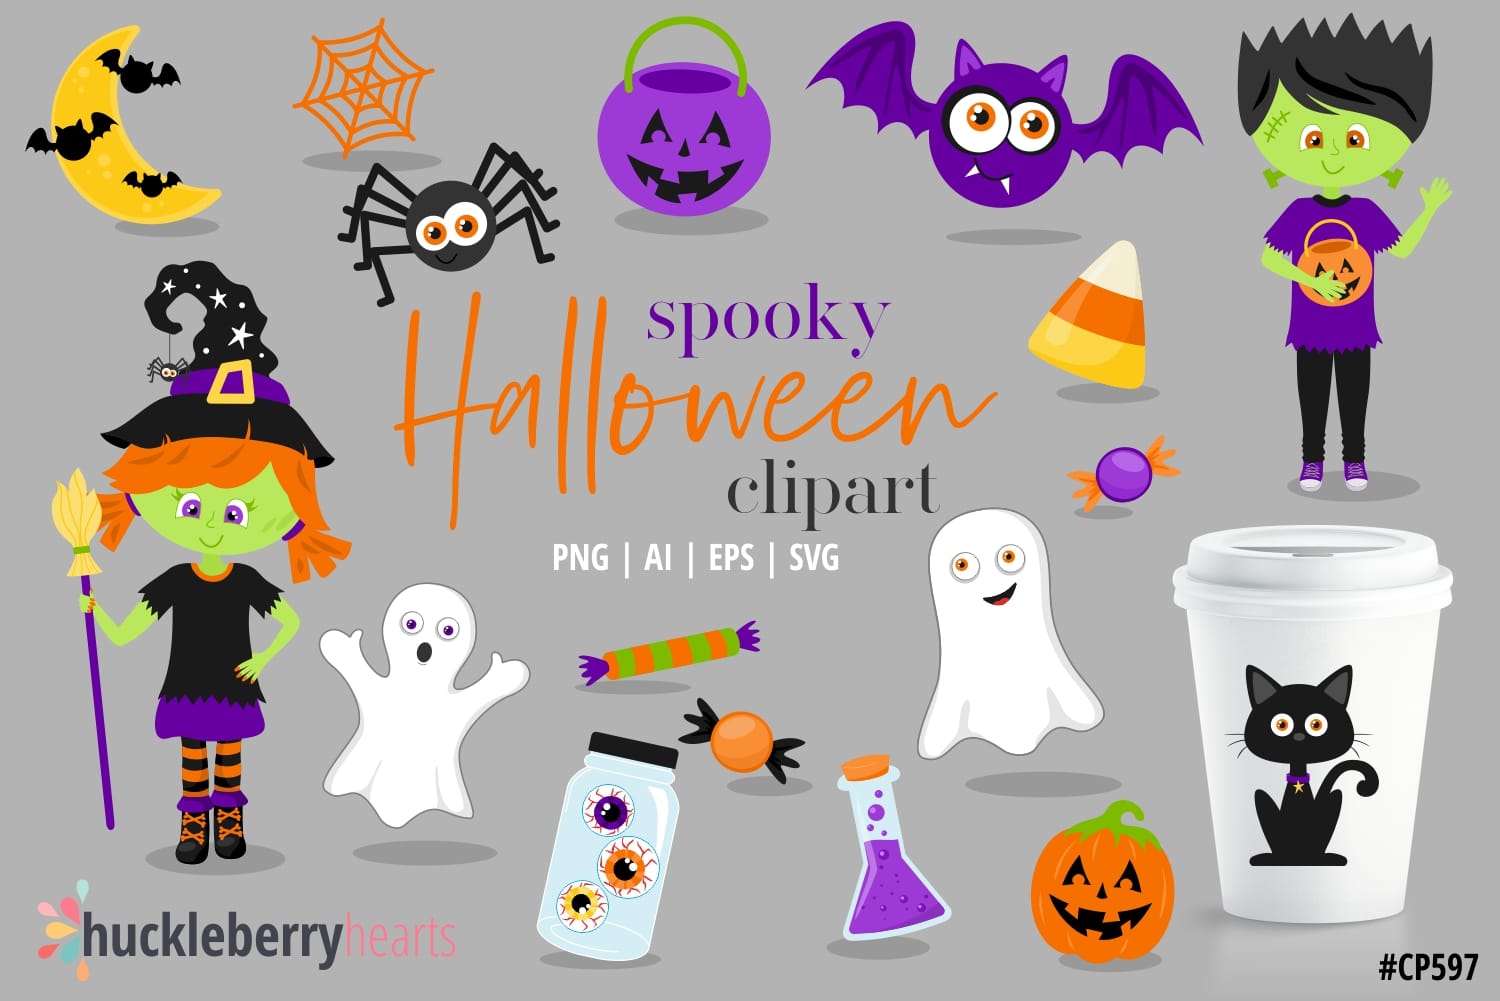 Halloween Clipart set with trick or treaters, ghosts, cat, bats, and spiders